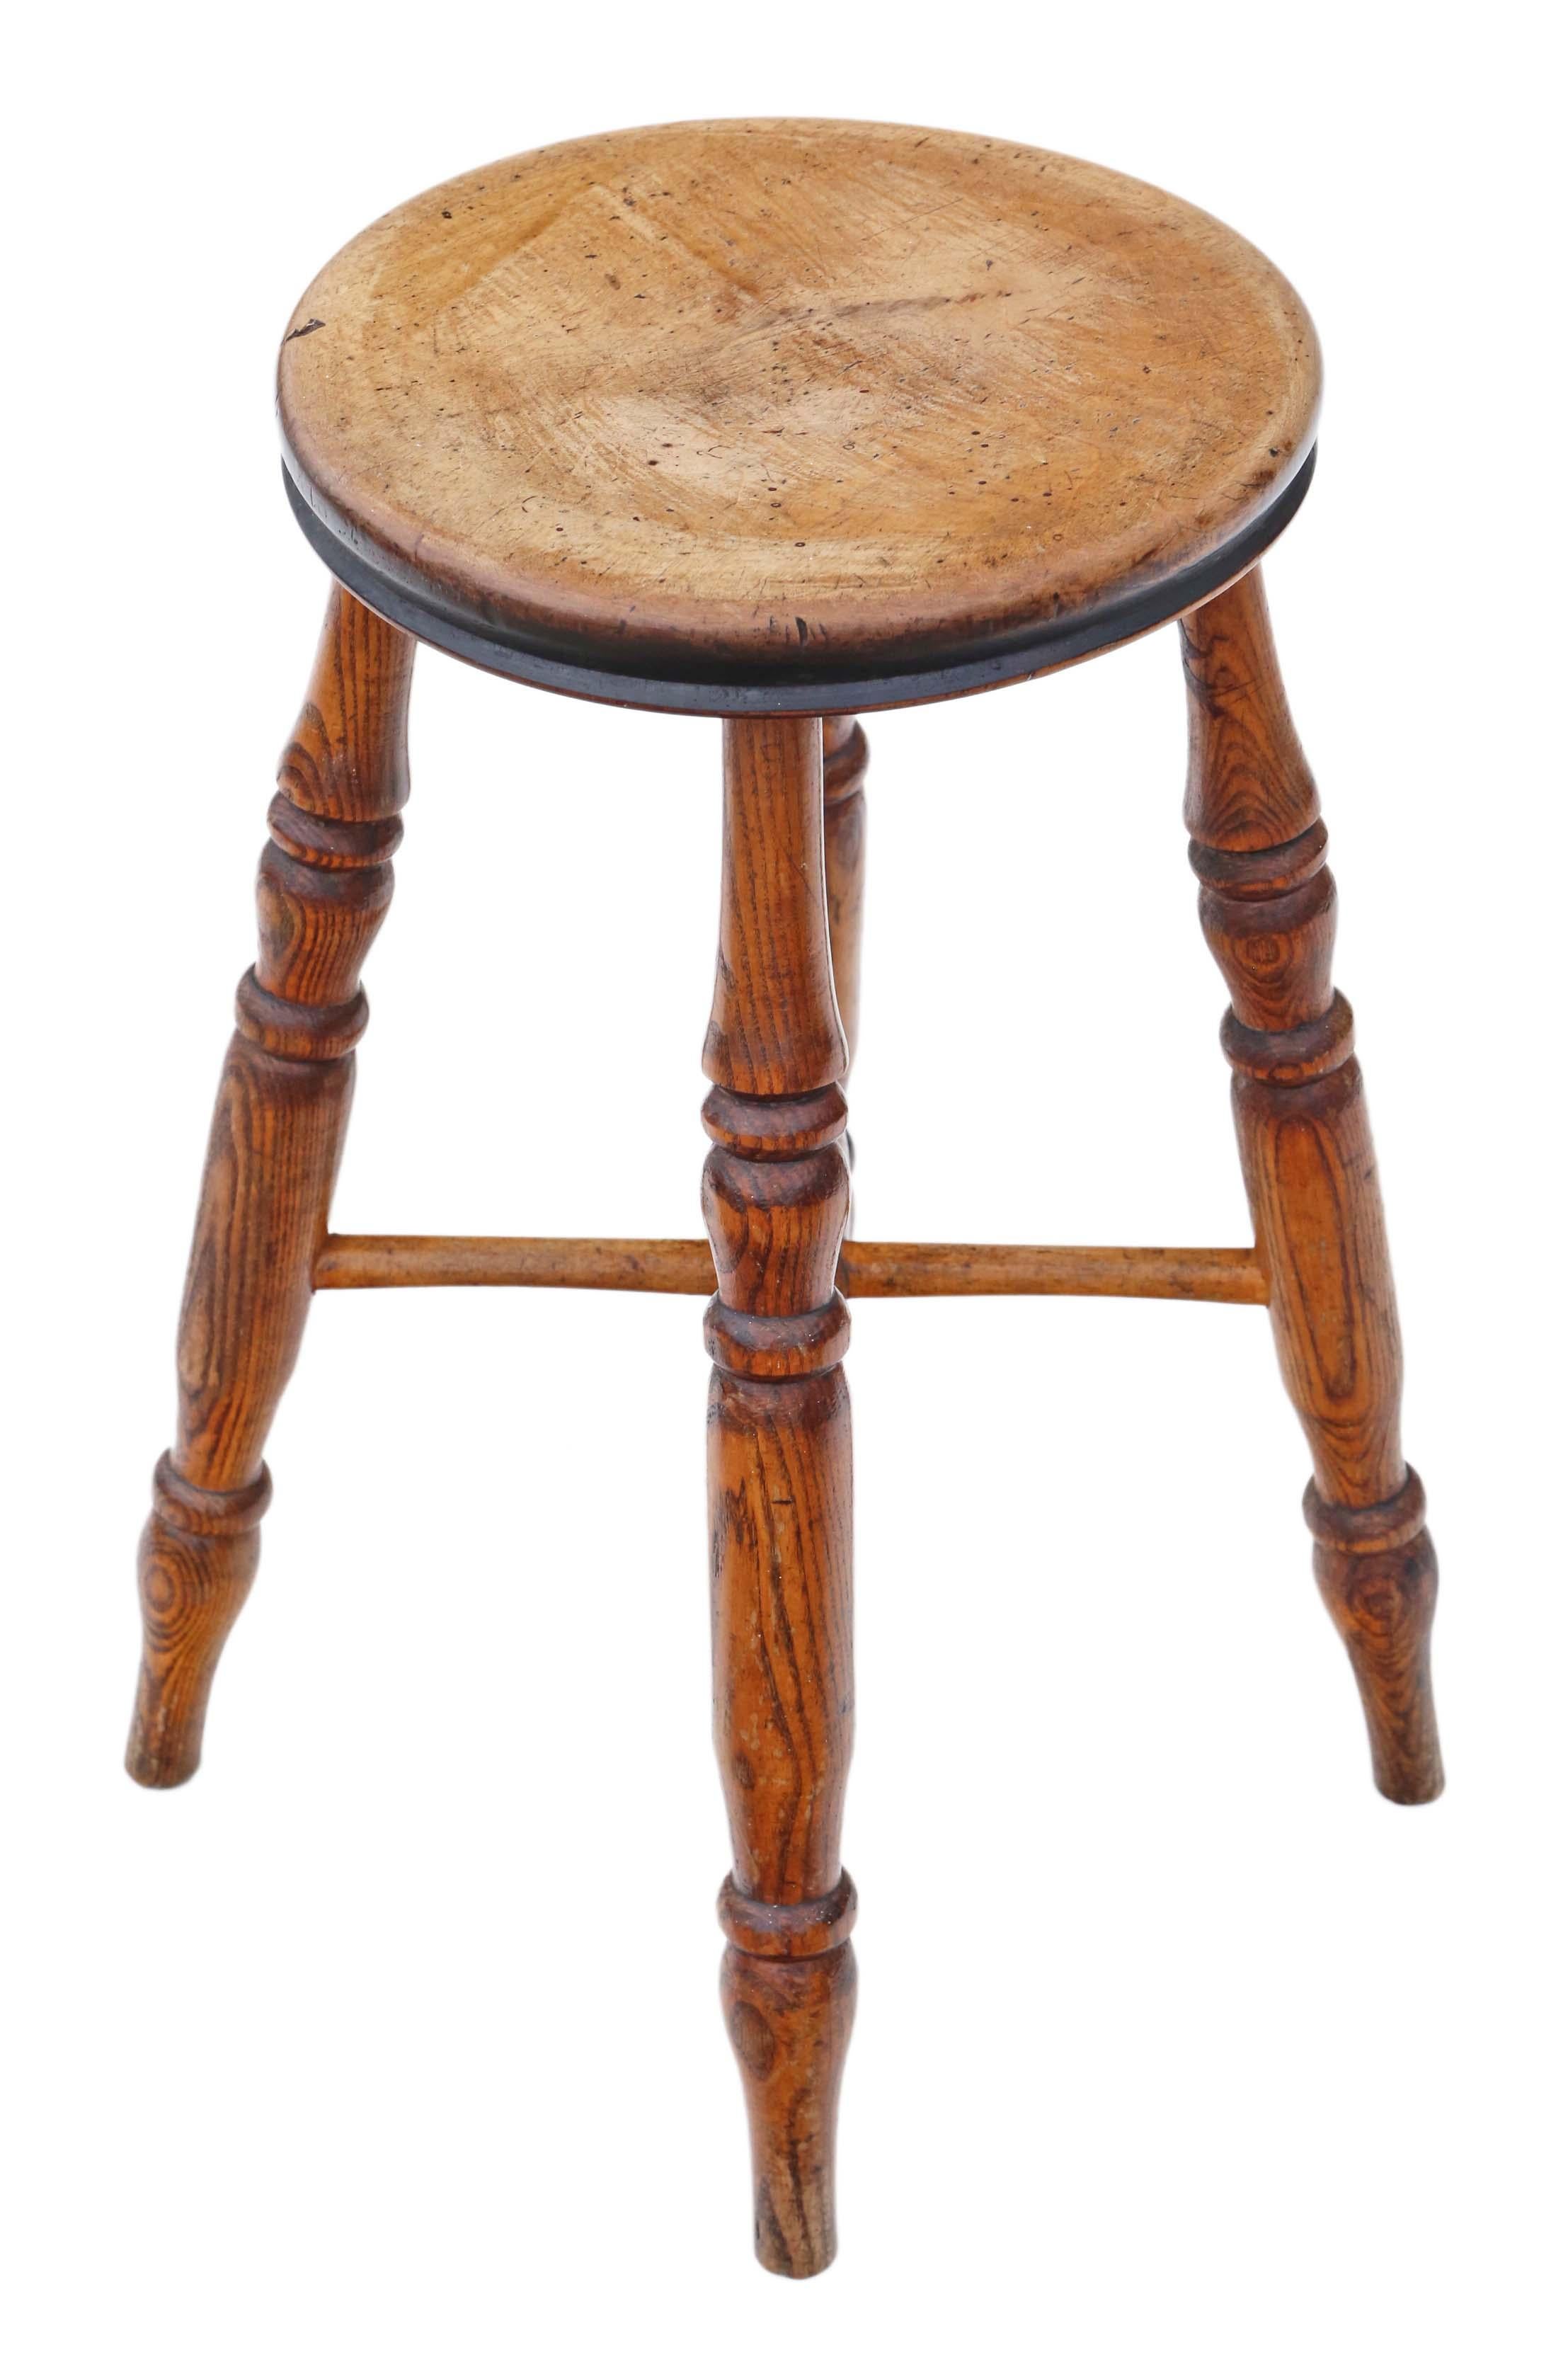 Antique quality Victorian 19th century elm and light mahogany stool.
Quality, decorative and attractive, strong with no loose joints or wobbles. No woodworm.
Would look amazing in the right location. Full of age, character and charm.
Overall